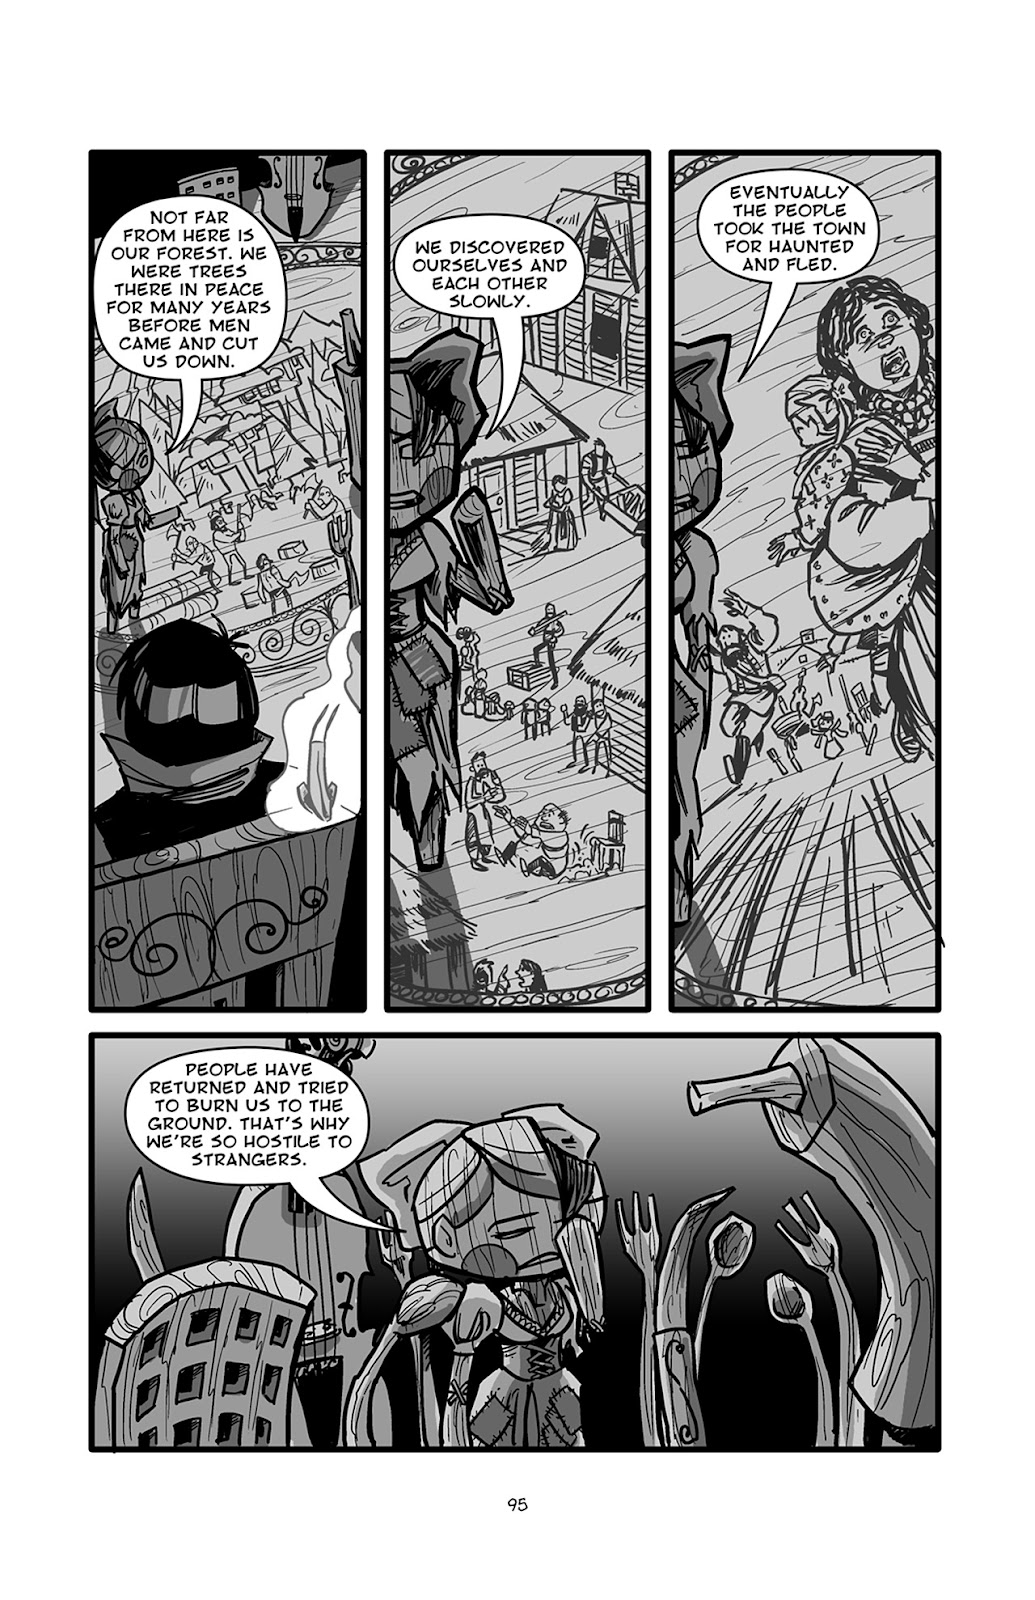 Pinocchio: Vampire Slayer - Of Wood and Blood issue 4 - Page 22